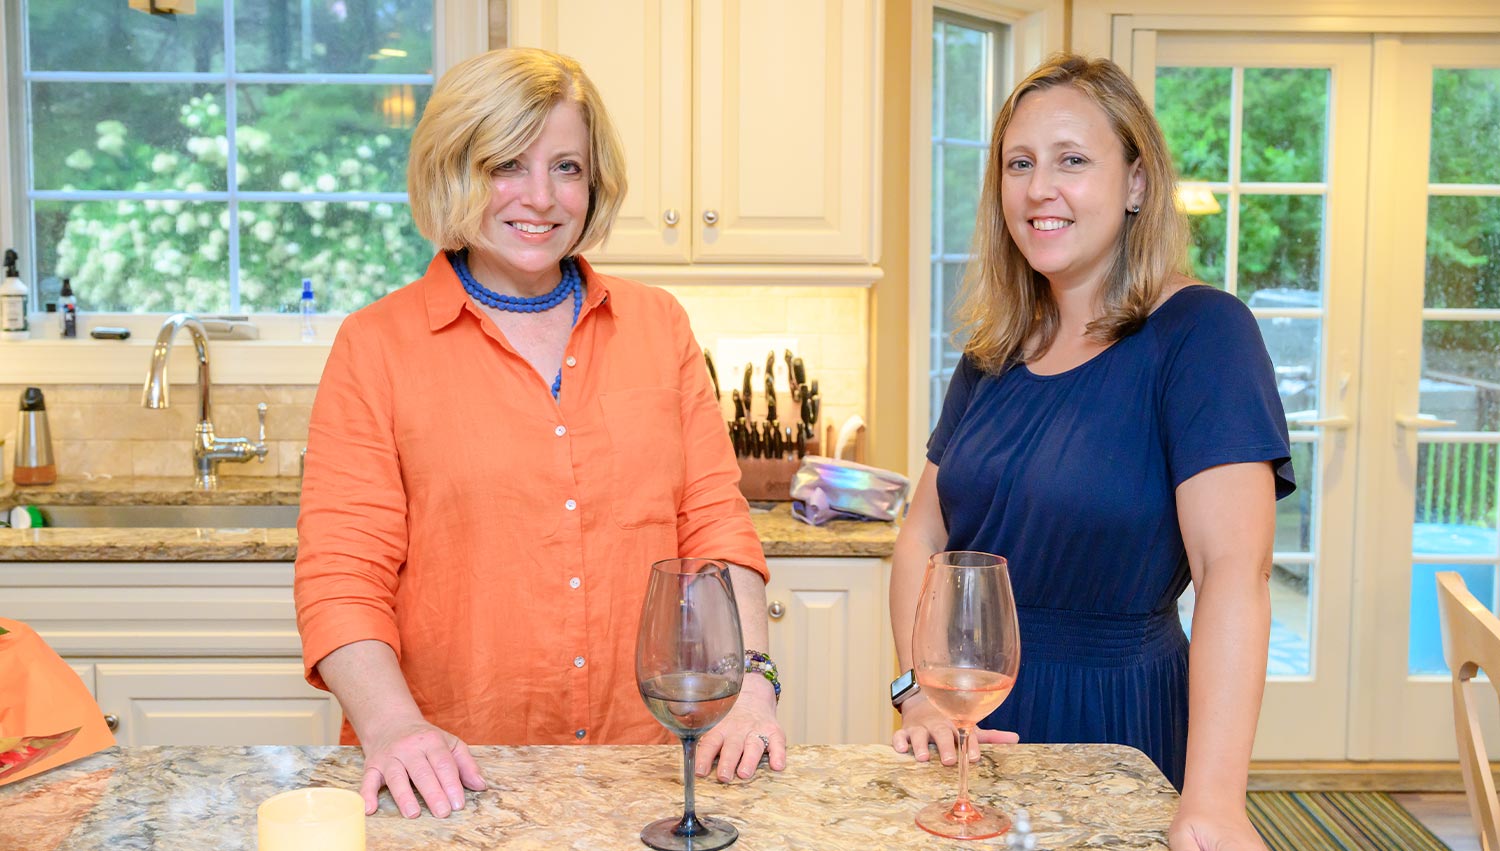 Susan Agostini and Caroline Robbins Gale stand beside each other smiling while standing in the kitchen at the Agostini home